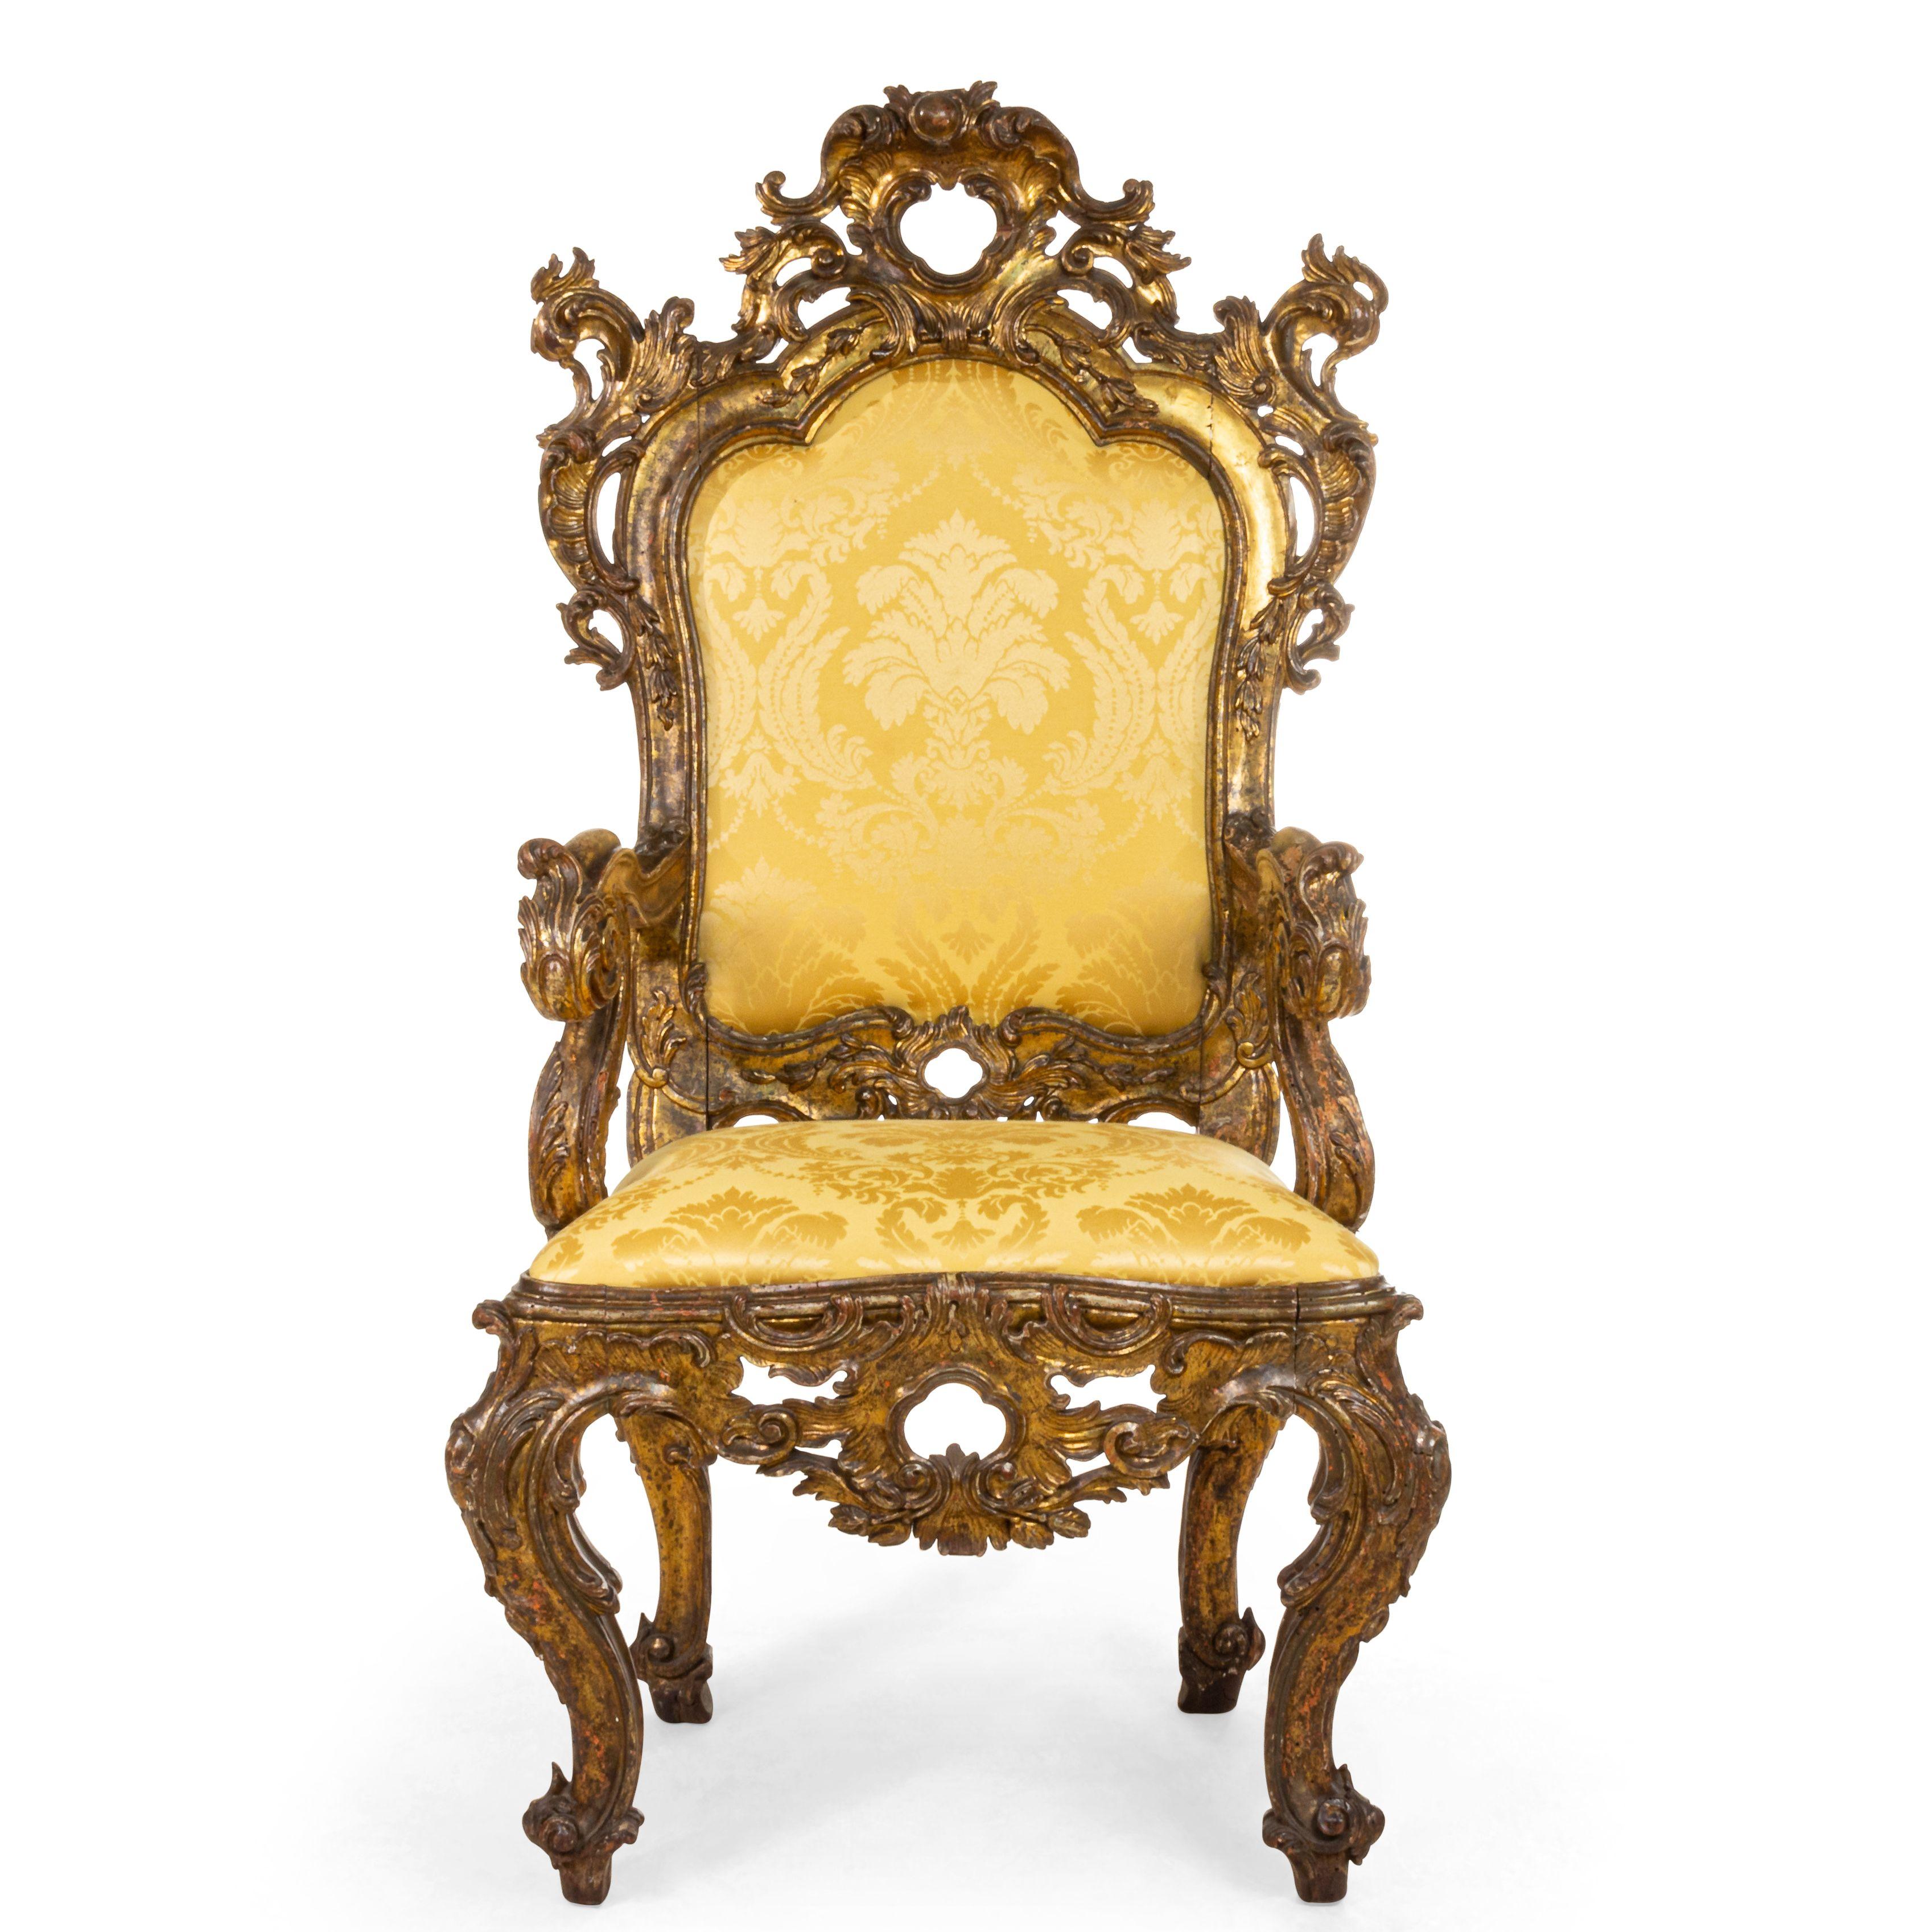 Italian Rococo Gold Damask Throne Chair For Sale 2